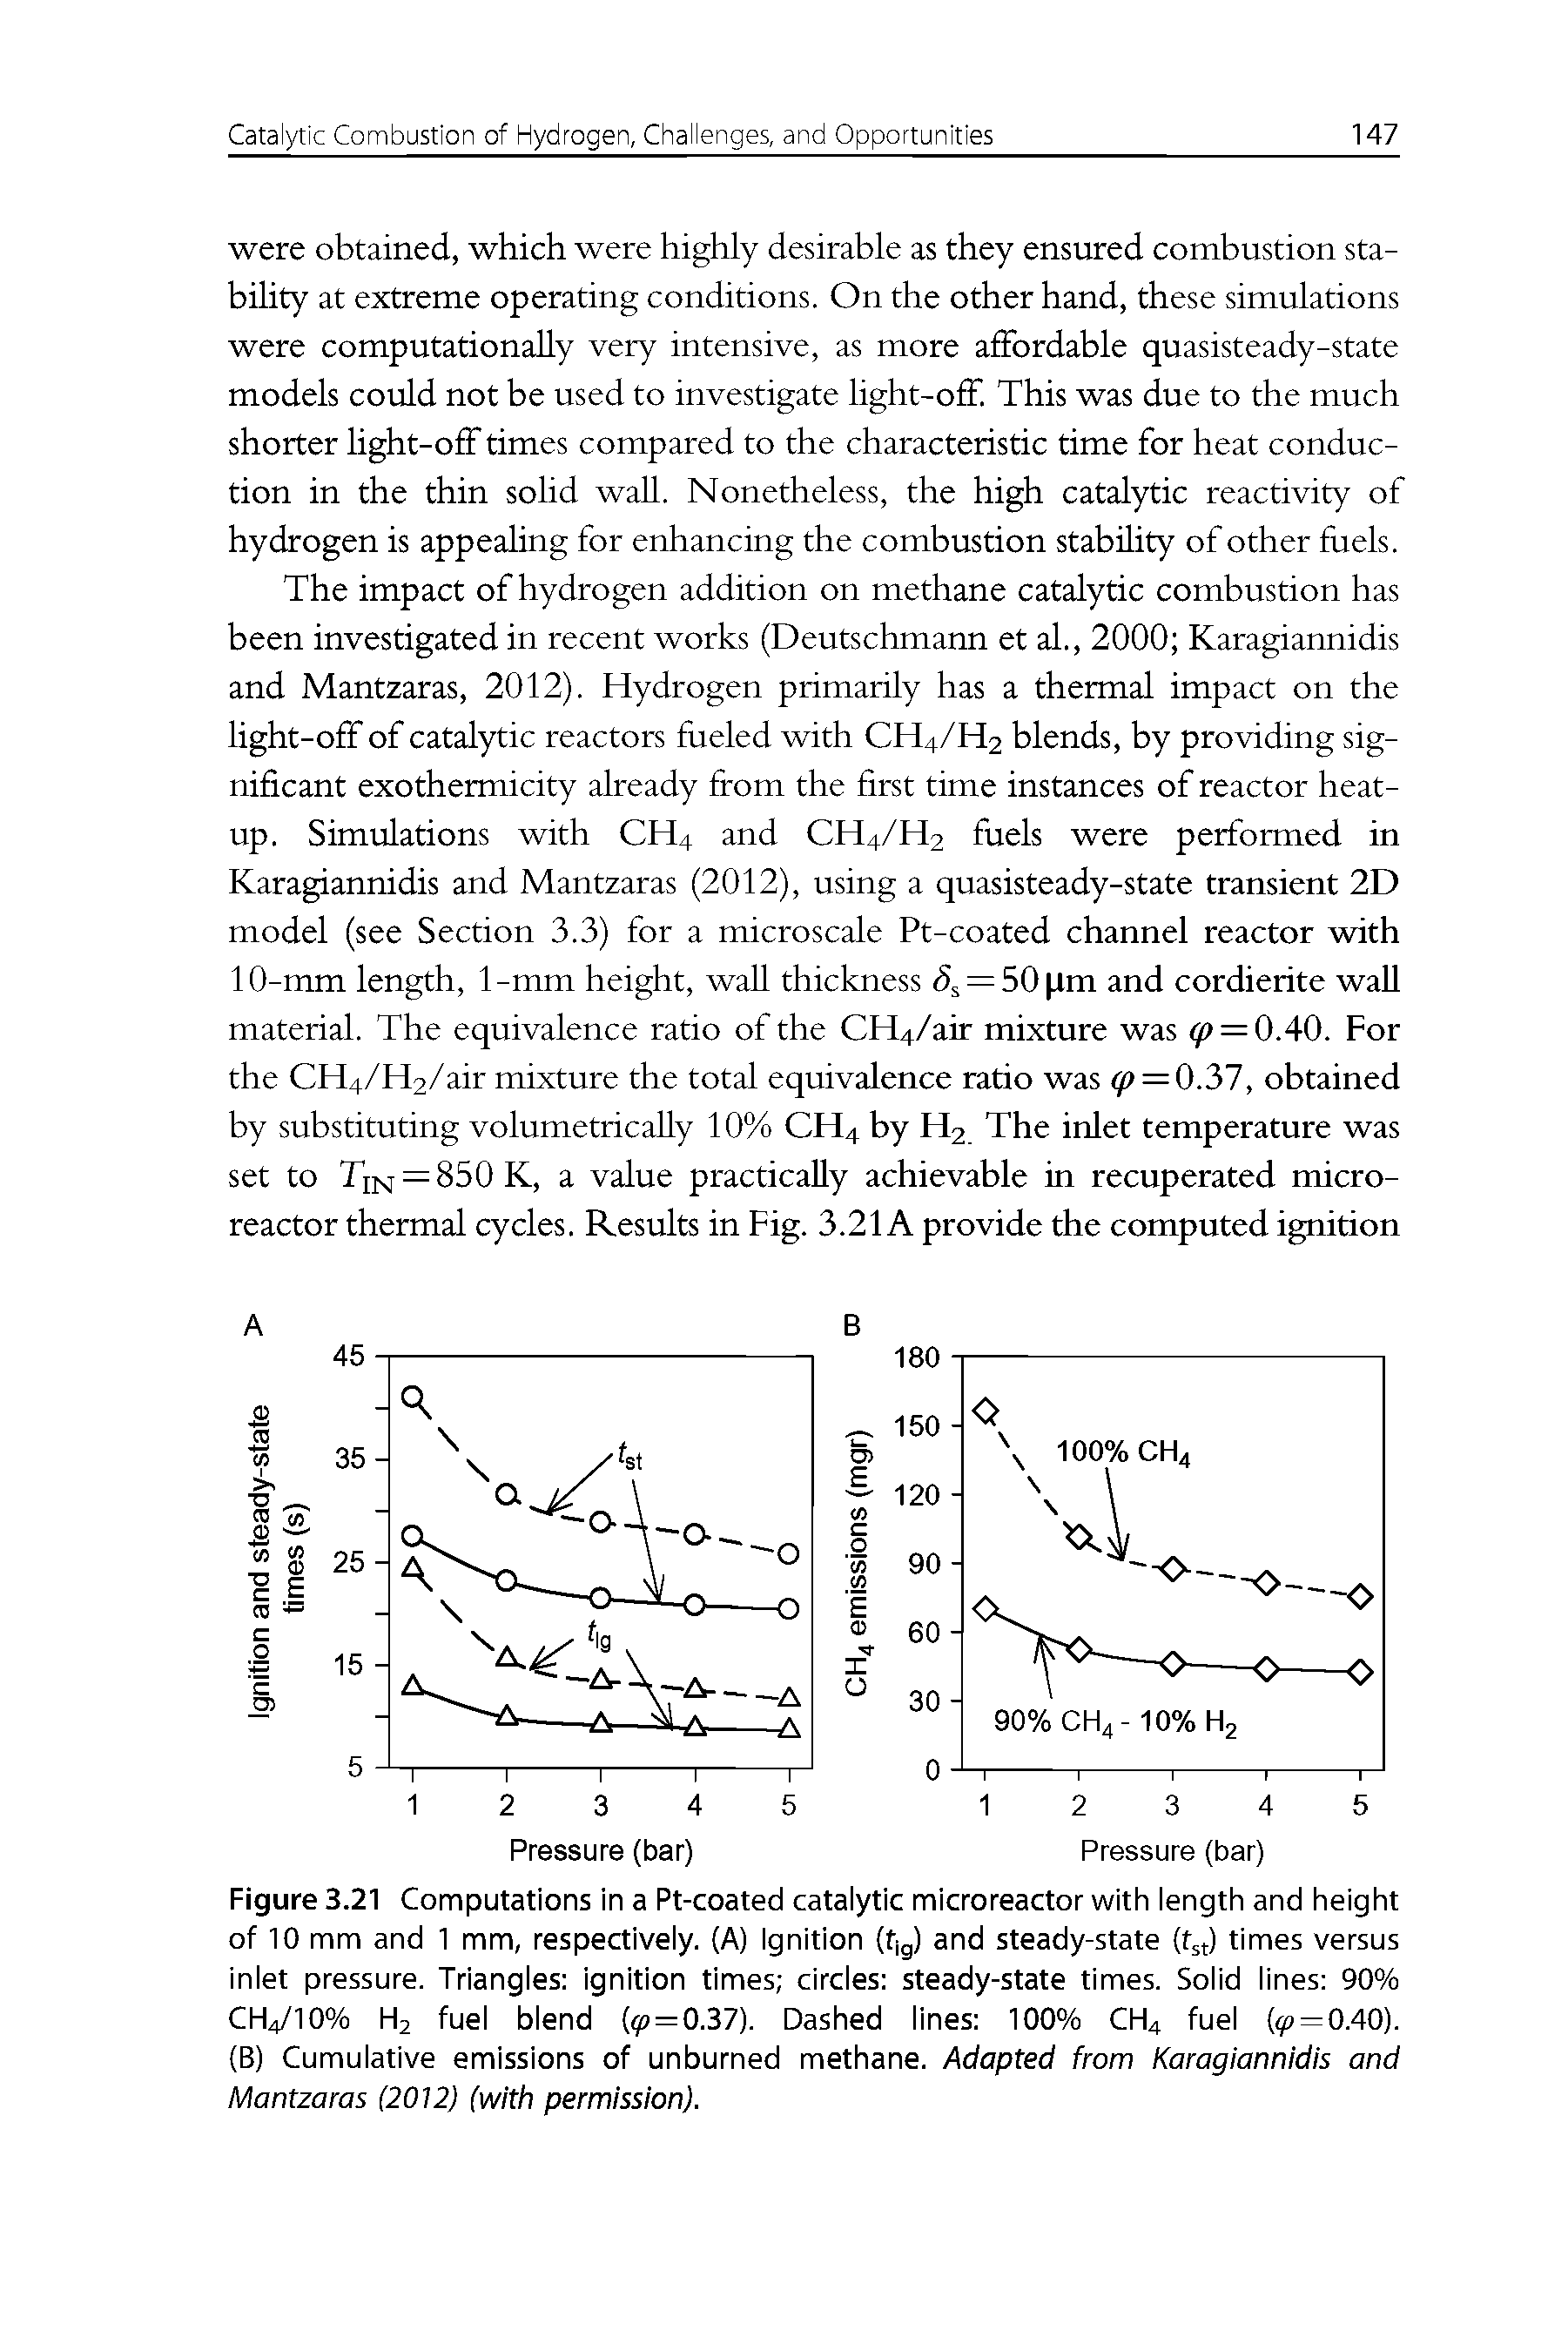 Figure 3.21 Computations in a Pt-coated catalytic microreactor with length and height of 10 mm and 1 mm, respectively. (A) Ignition (t g) and steady-state (f t) times versus inlet pressure. Triangles ignition times circles steady-state times. Solid lines 90% CI-14/10% H2 fuel blend ( =0.37). Dashed lines 100% CH4 fuel ( =0.40). (B) Cumulative emissions of unburned methane. Adapted from Karagiannidis and Mantzaras (2012) (with permission).